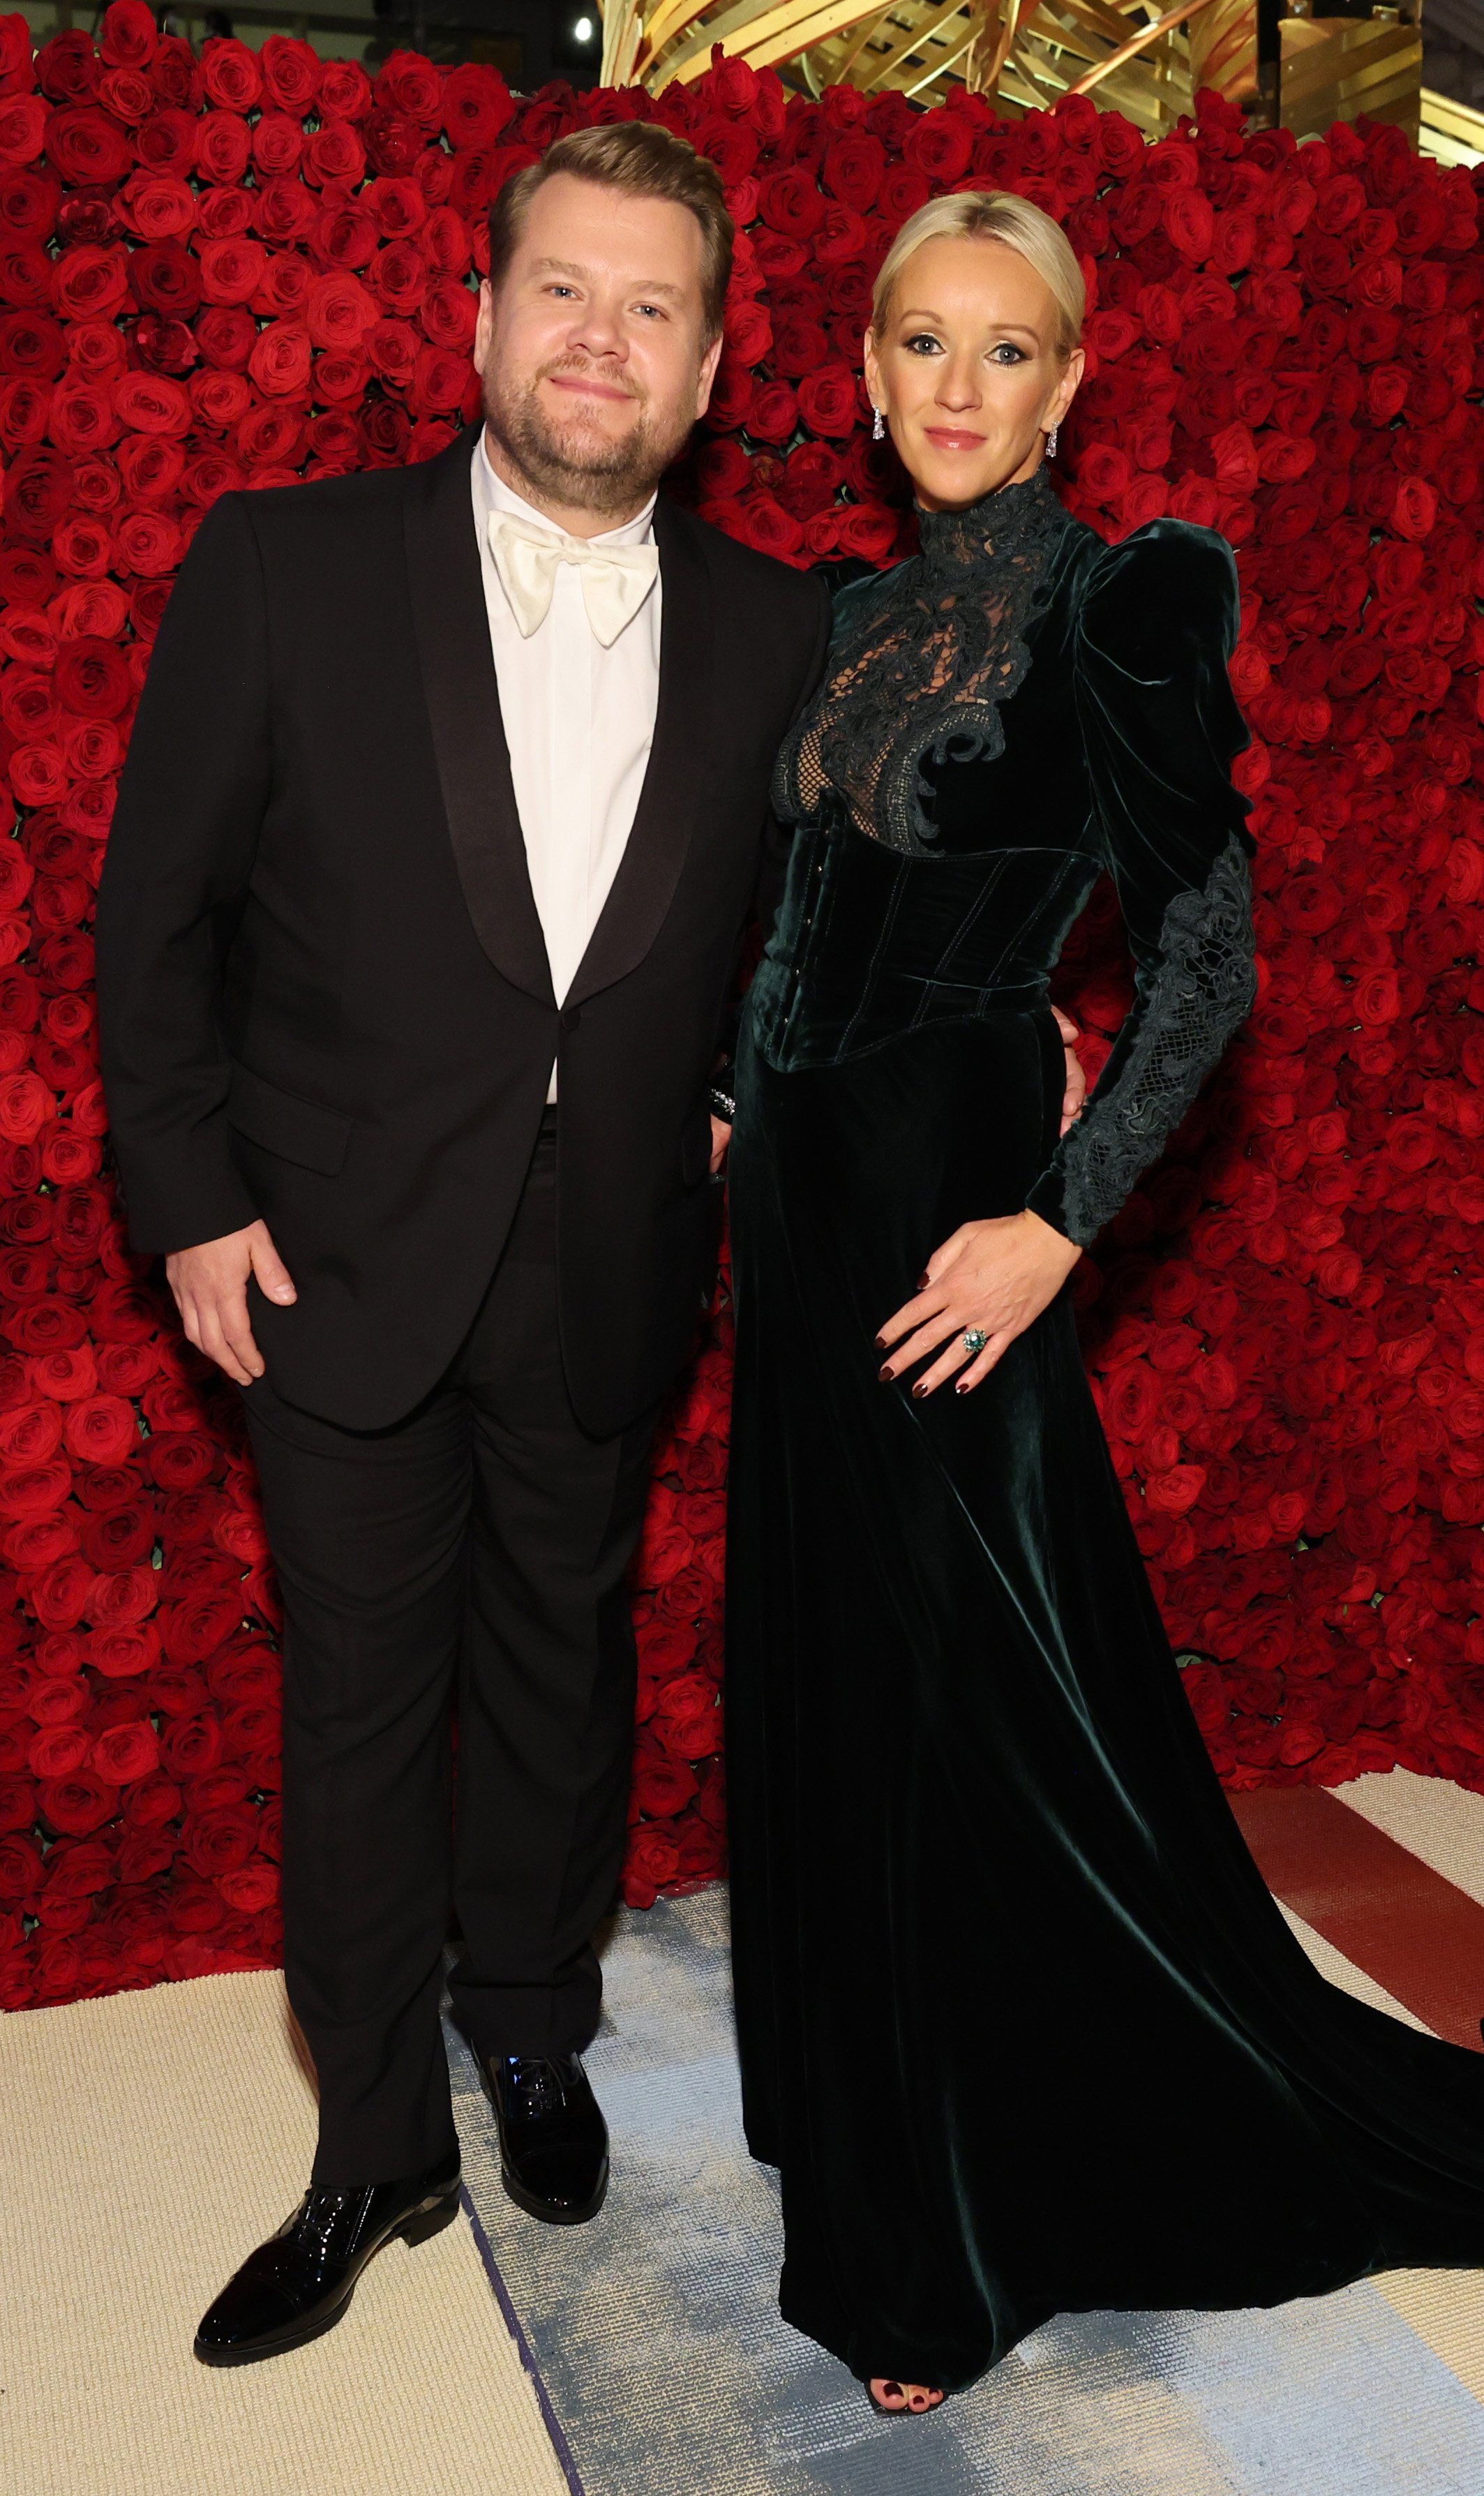 James Corden and Julia Carey at The Metropolitan Museum of Art on May 02, 2022 in New York City. | Source: Getty Images